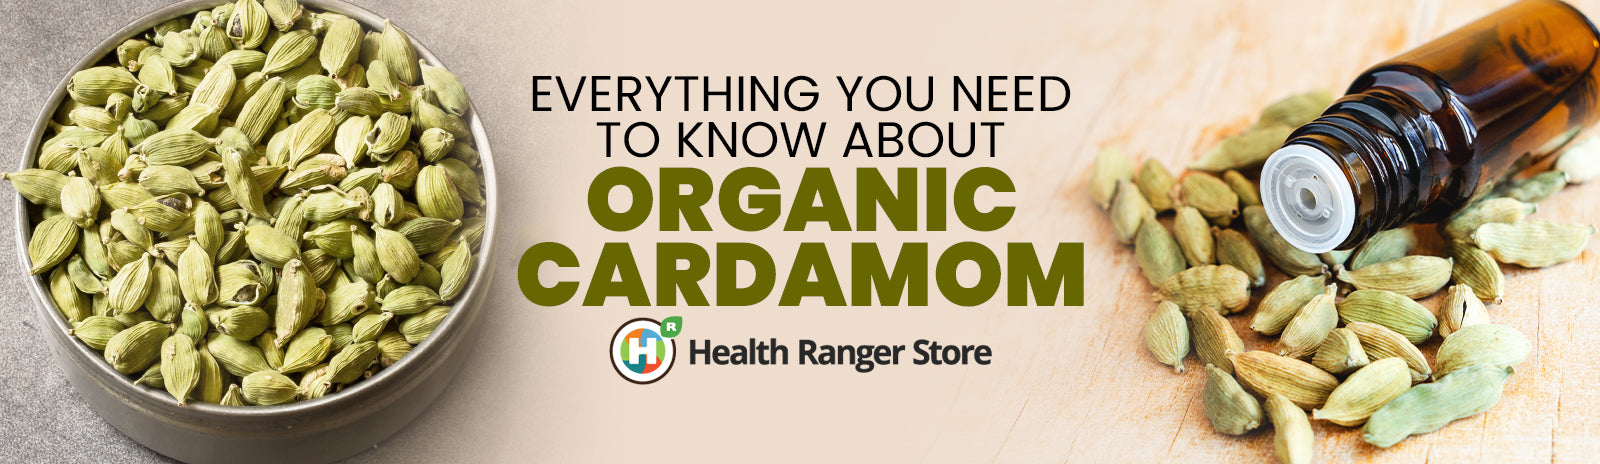 Everything you need to know about Organic Cardamom Essential Oil